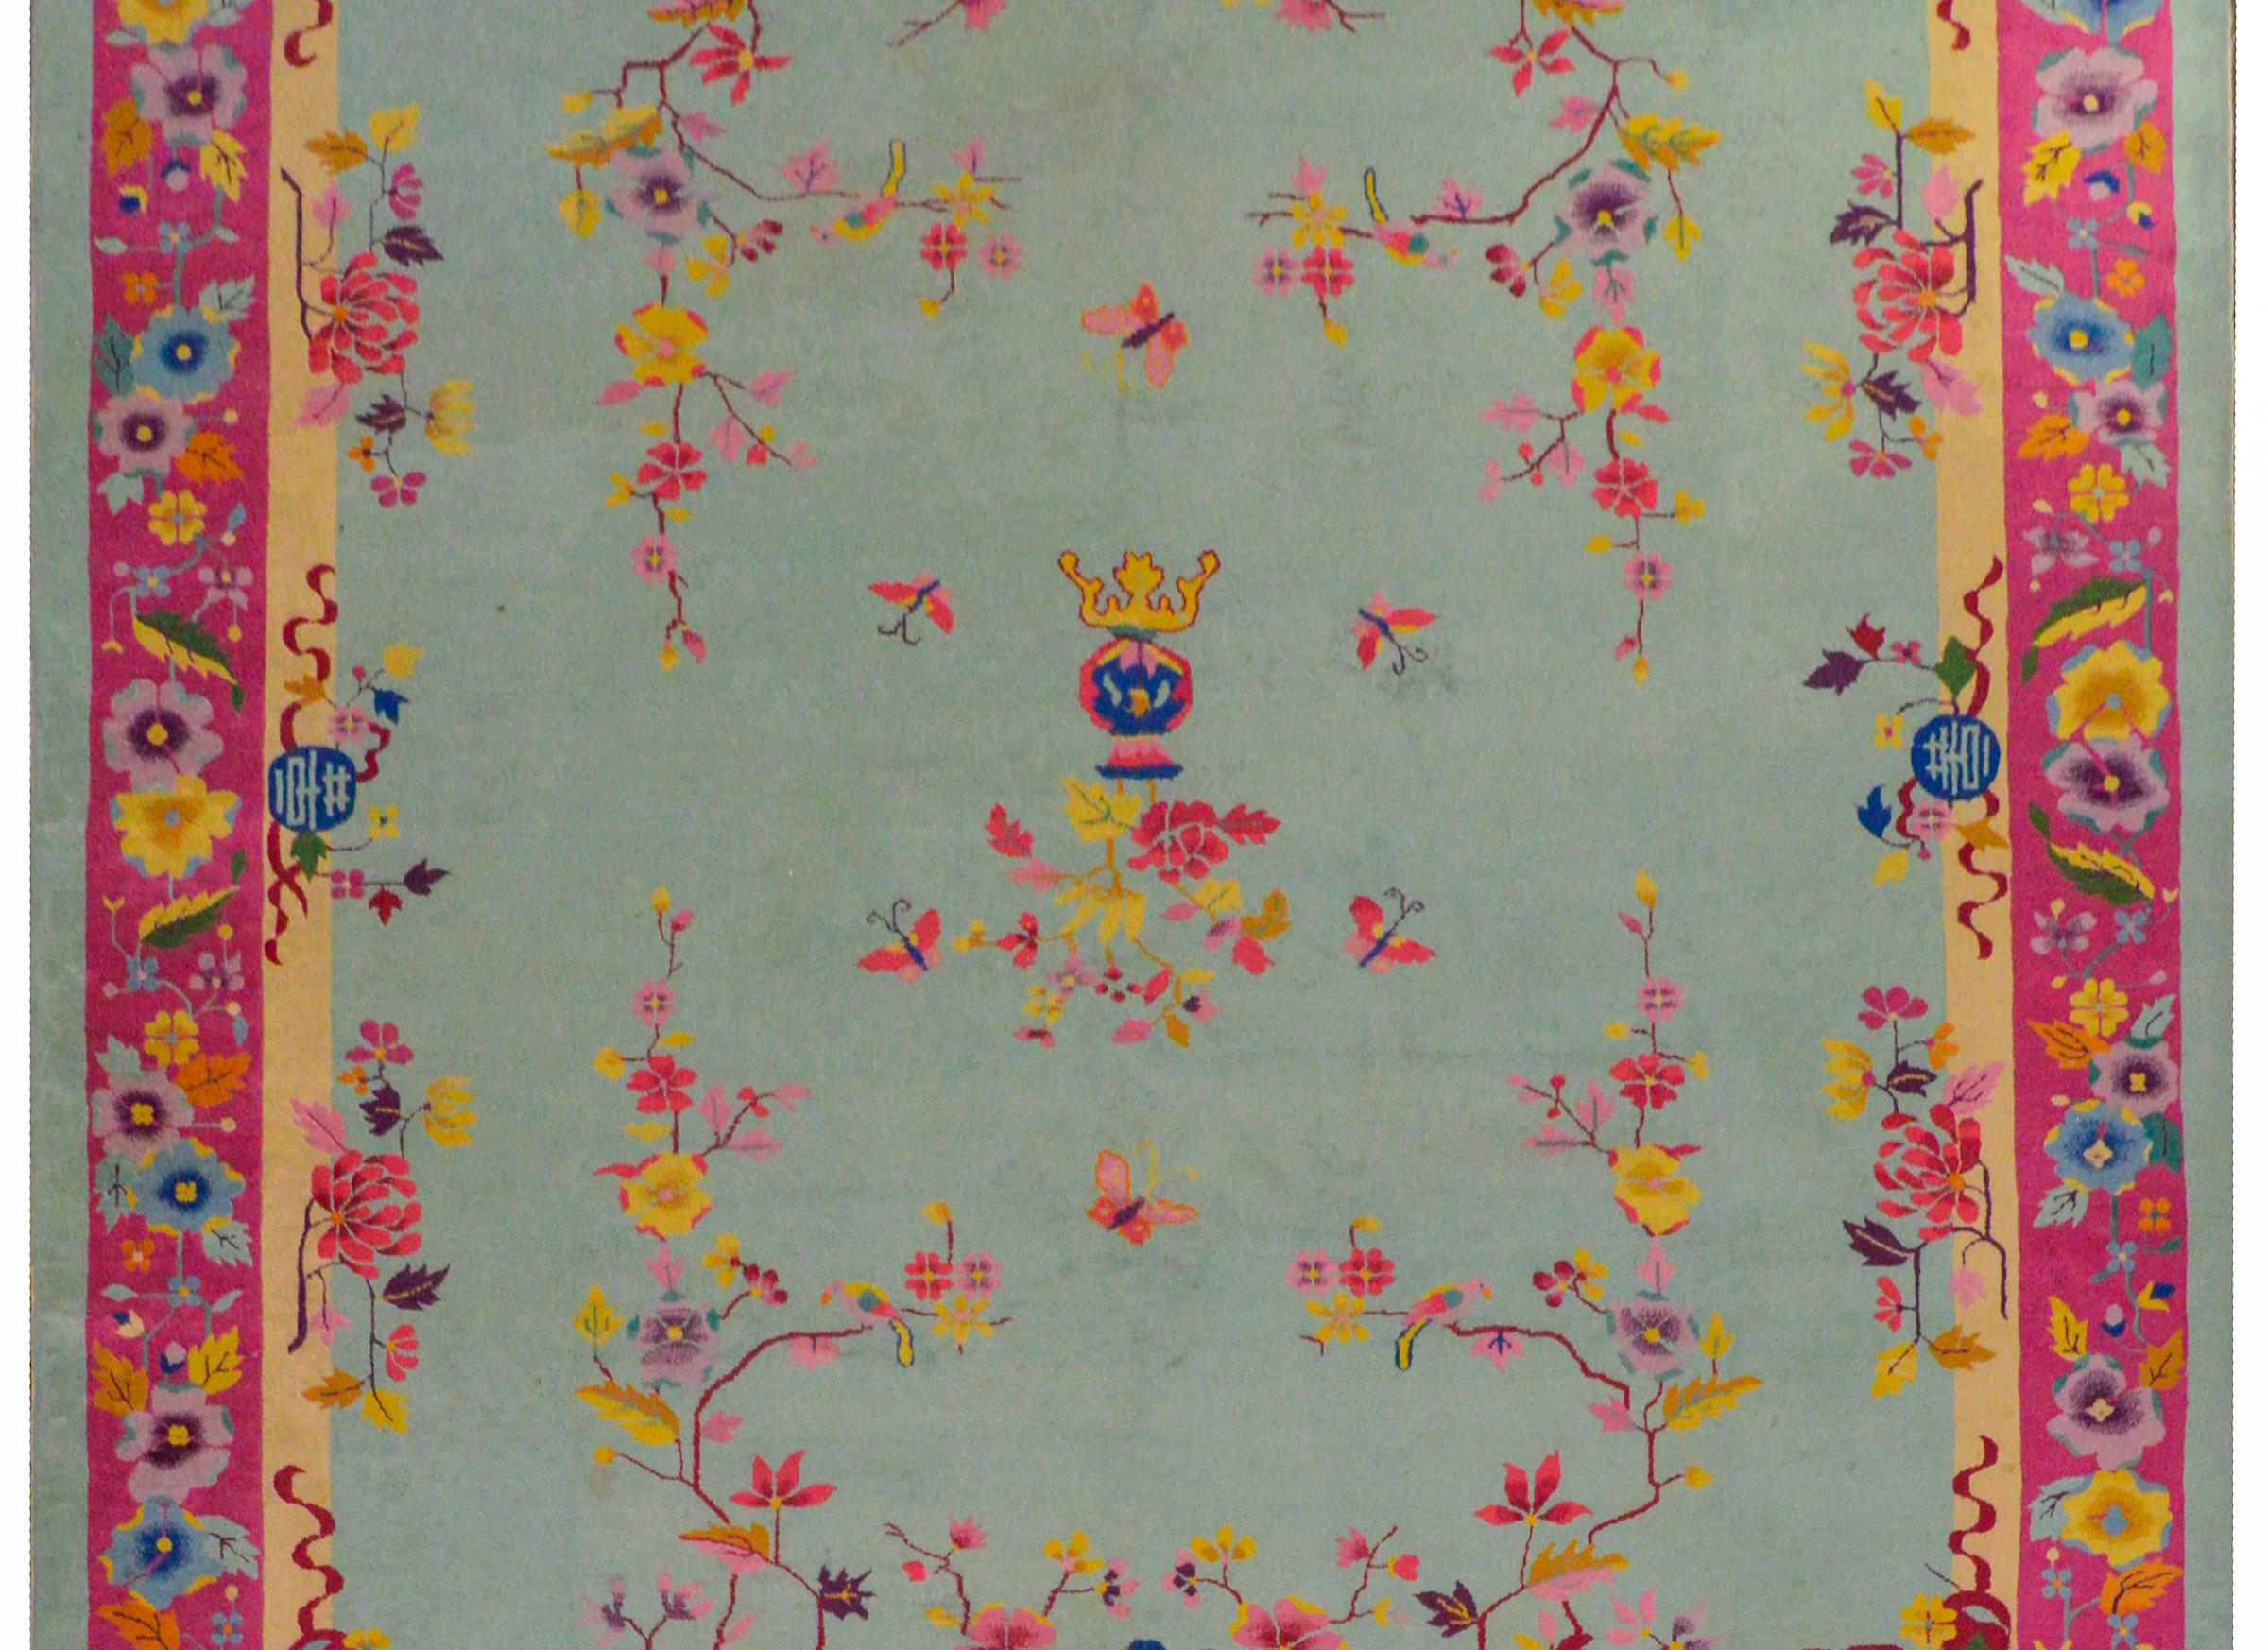 A brilliant Chinese Art Deco rug with an unusual color palette of pinks, fuchsia, gold, orange, and lavender on a pale indigo background surrounded by a border of myriad flowers and leaves woven in bright colors.